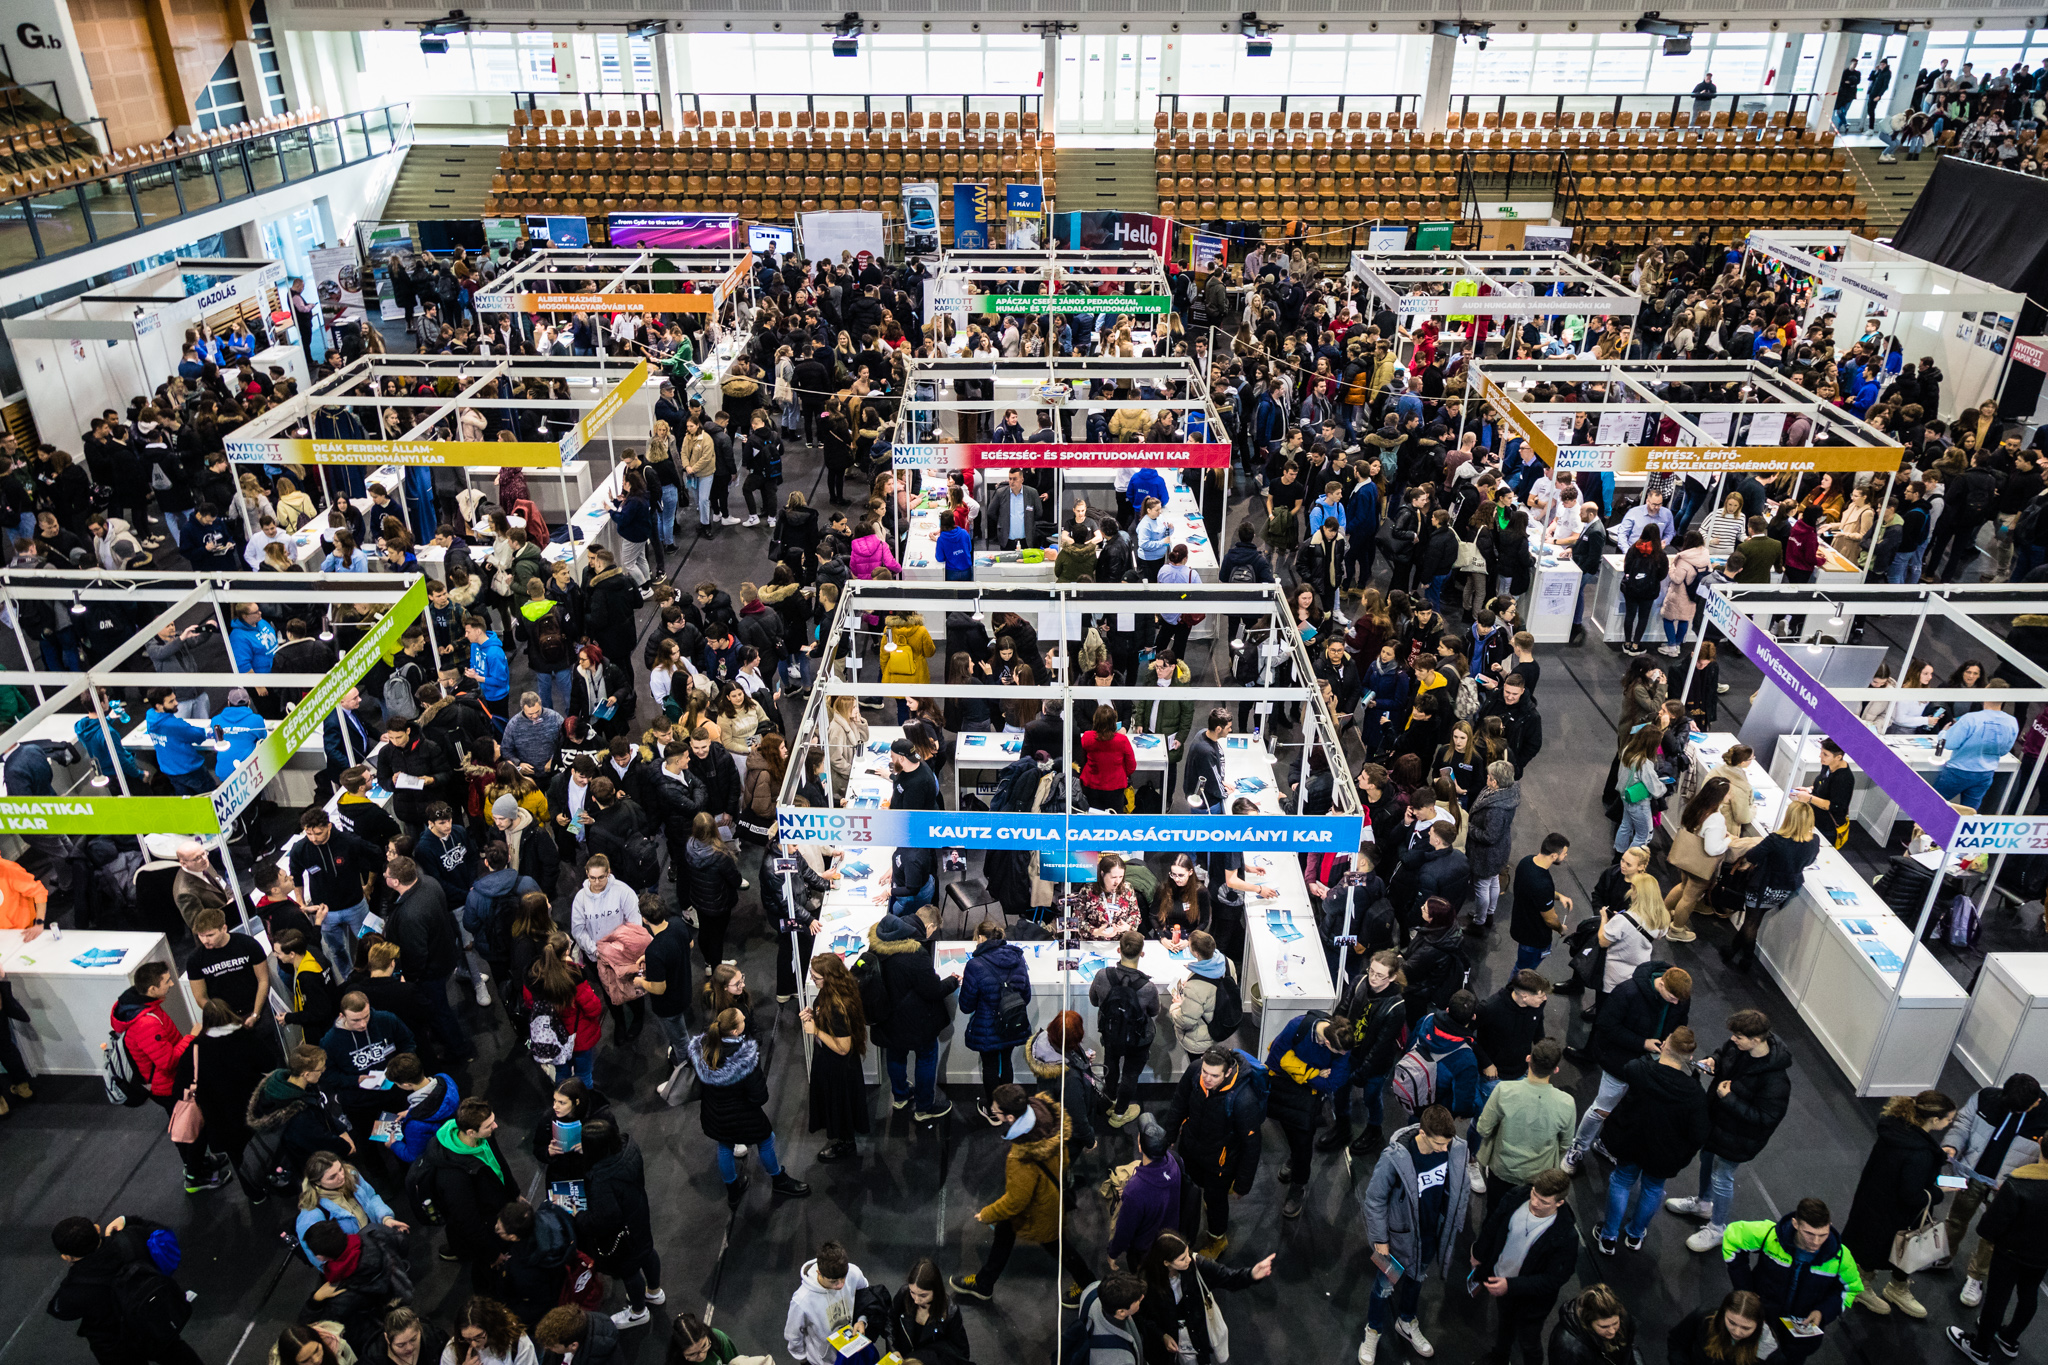 Thousands of secondary school students were attracted to SZE’s Open Day 